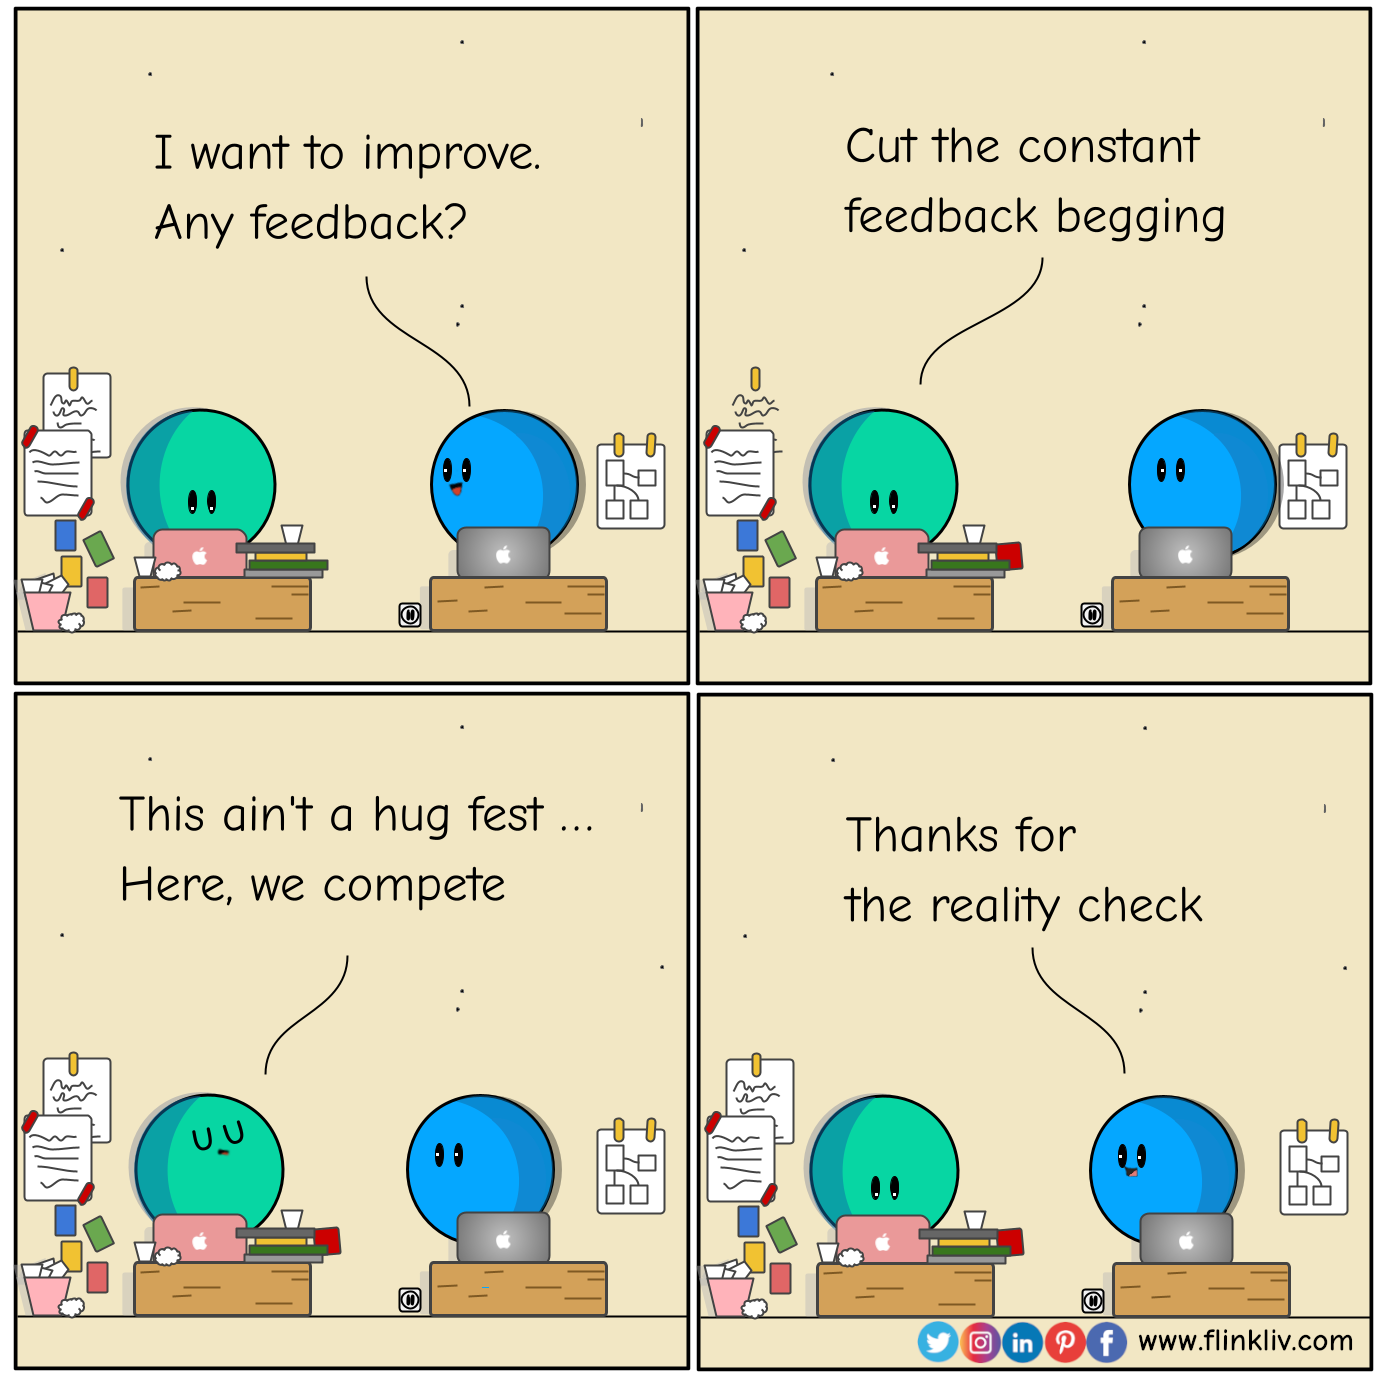 Conversation between A and B about check the people before asking them for feedback. B: I want to improve. Any feedback for my presentation? A: Cut the constant feedback begging. A: This ain't a hug fest; here, we compete. B: Thanks for the reality check. By flinkliv.com